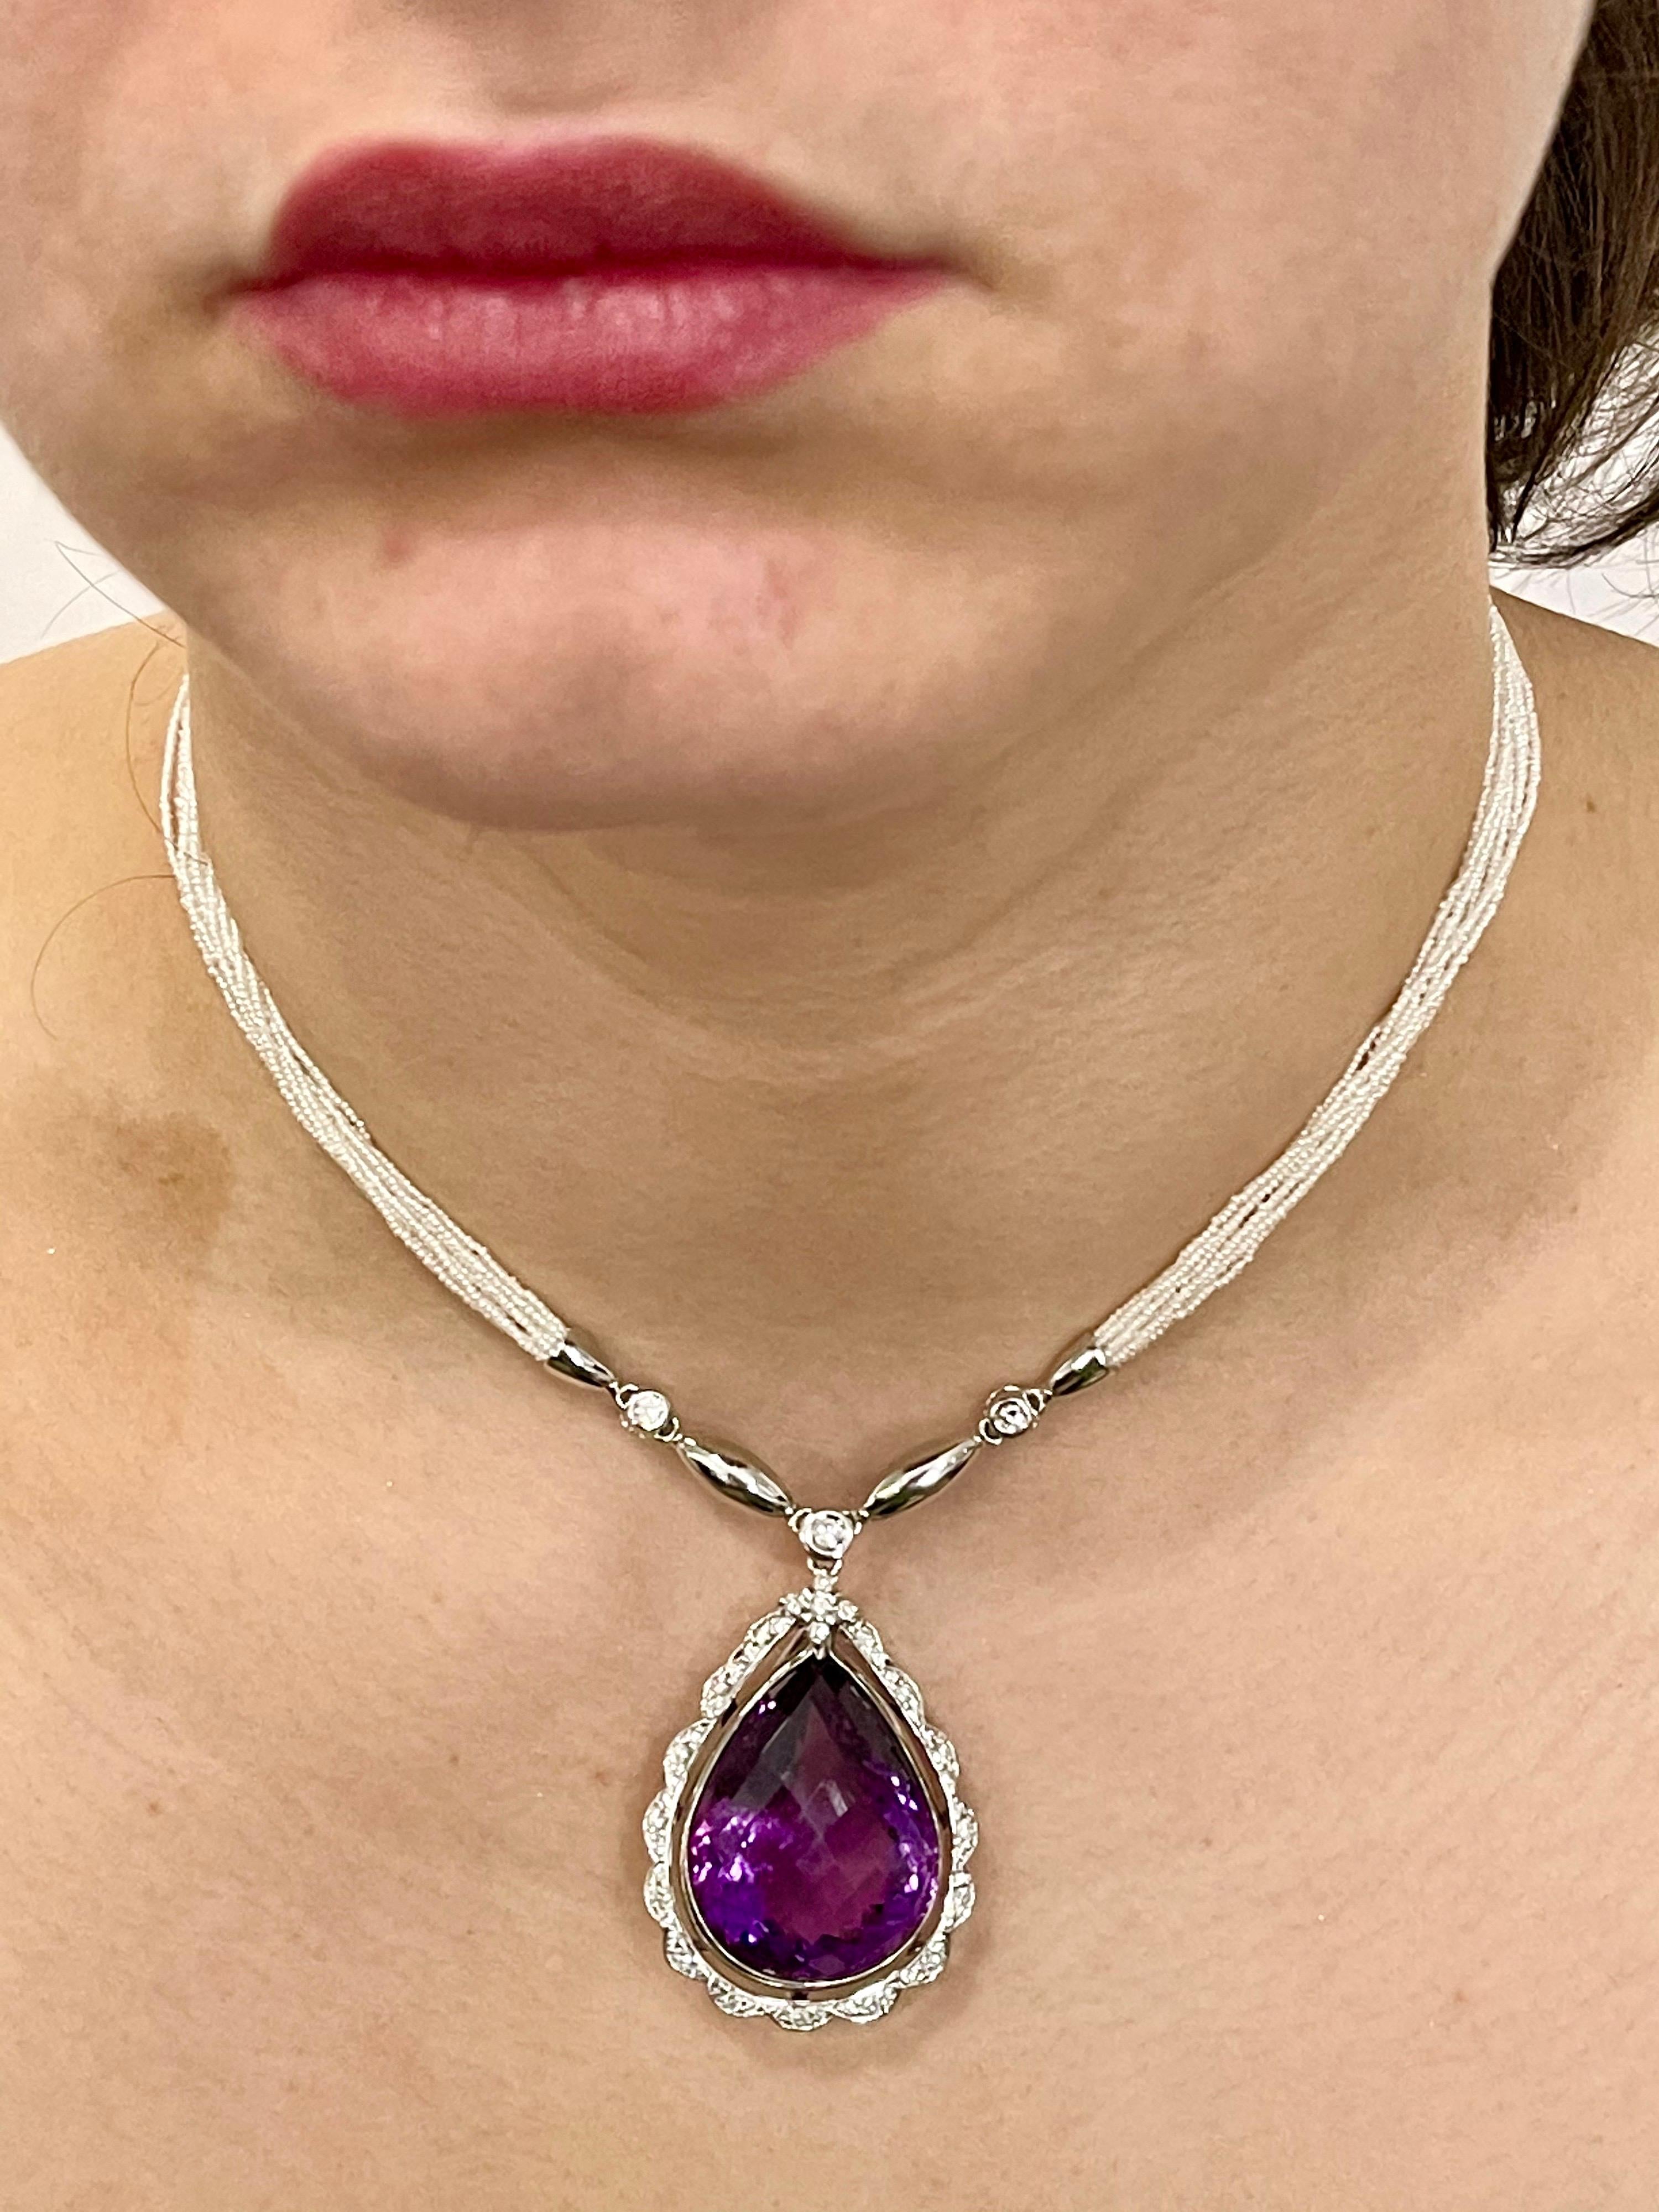 54 Carat Tear Drop Amethyst and Diamonds with Seed Pearl Necklace 18 Karat Gold For Sale 2